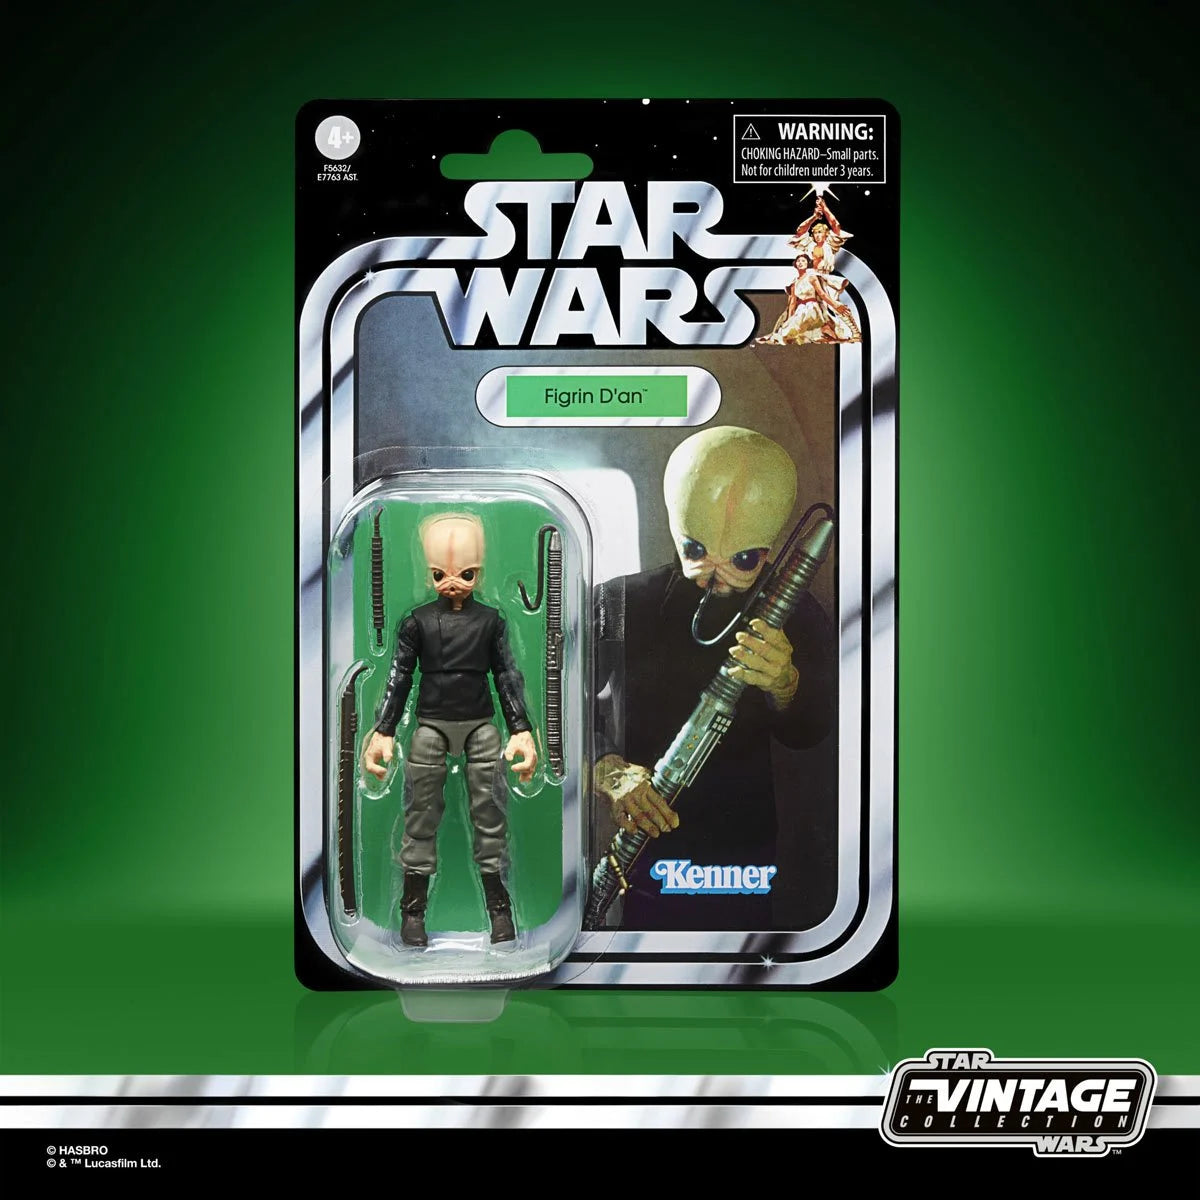 Star Wars: The Vintage Collection Figrin D'an Hasbro No Protector Case